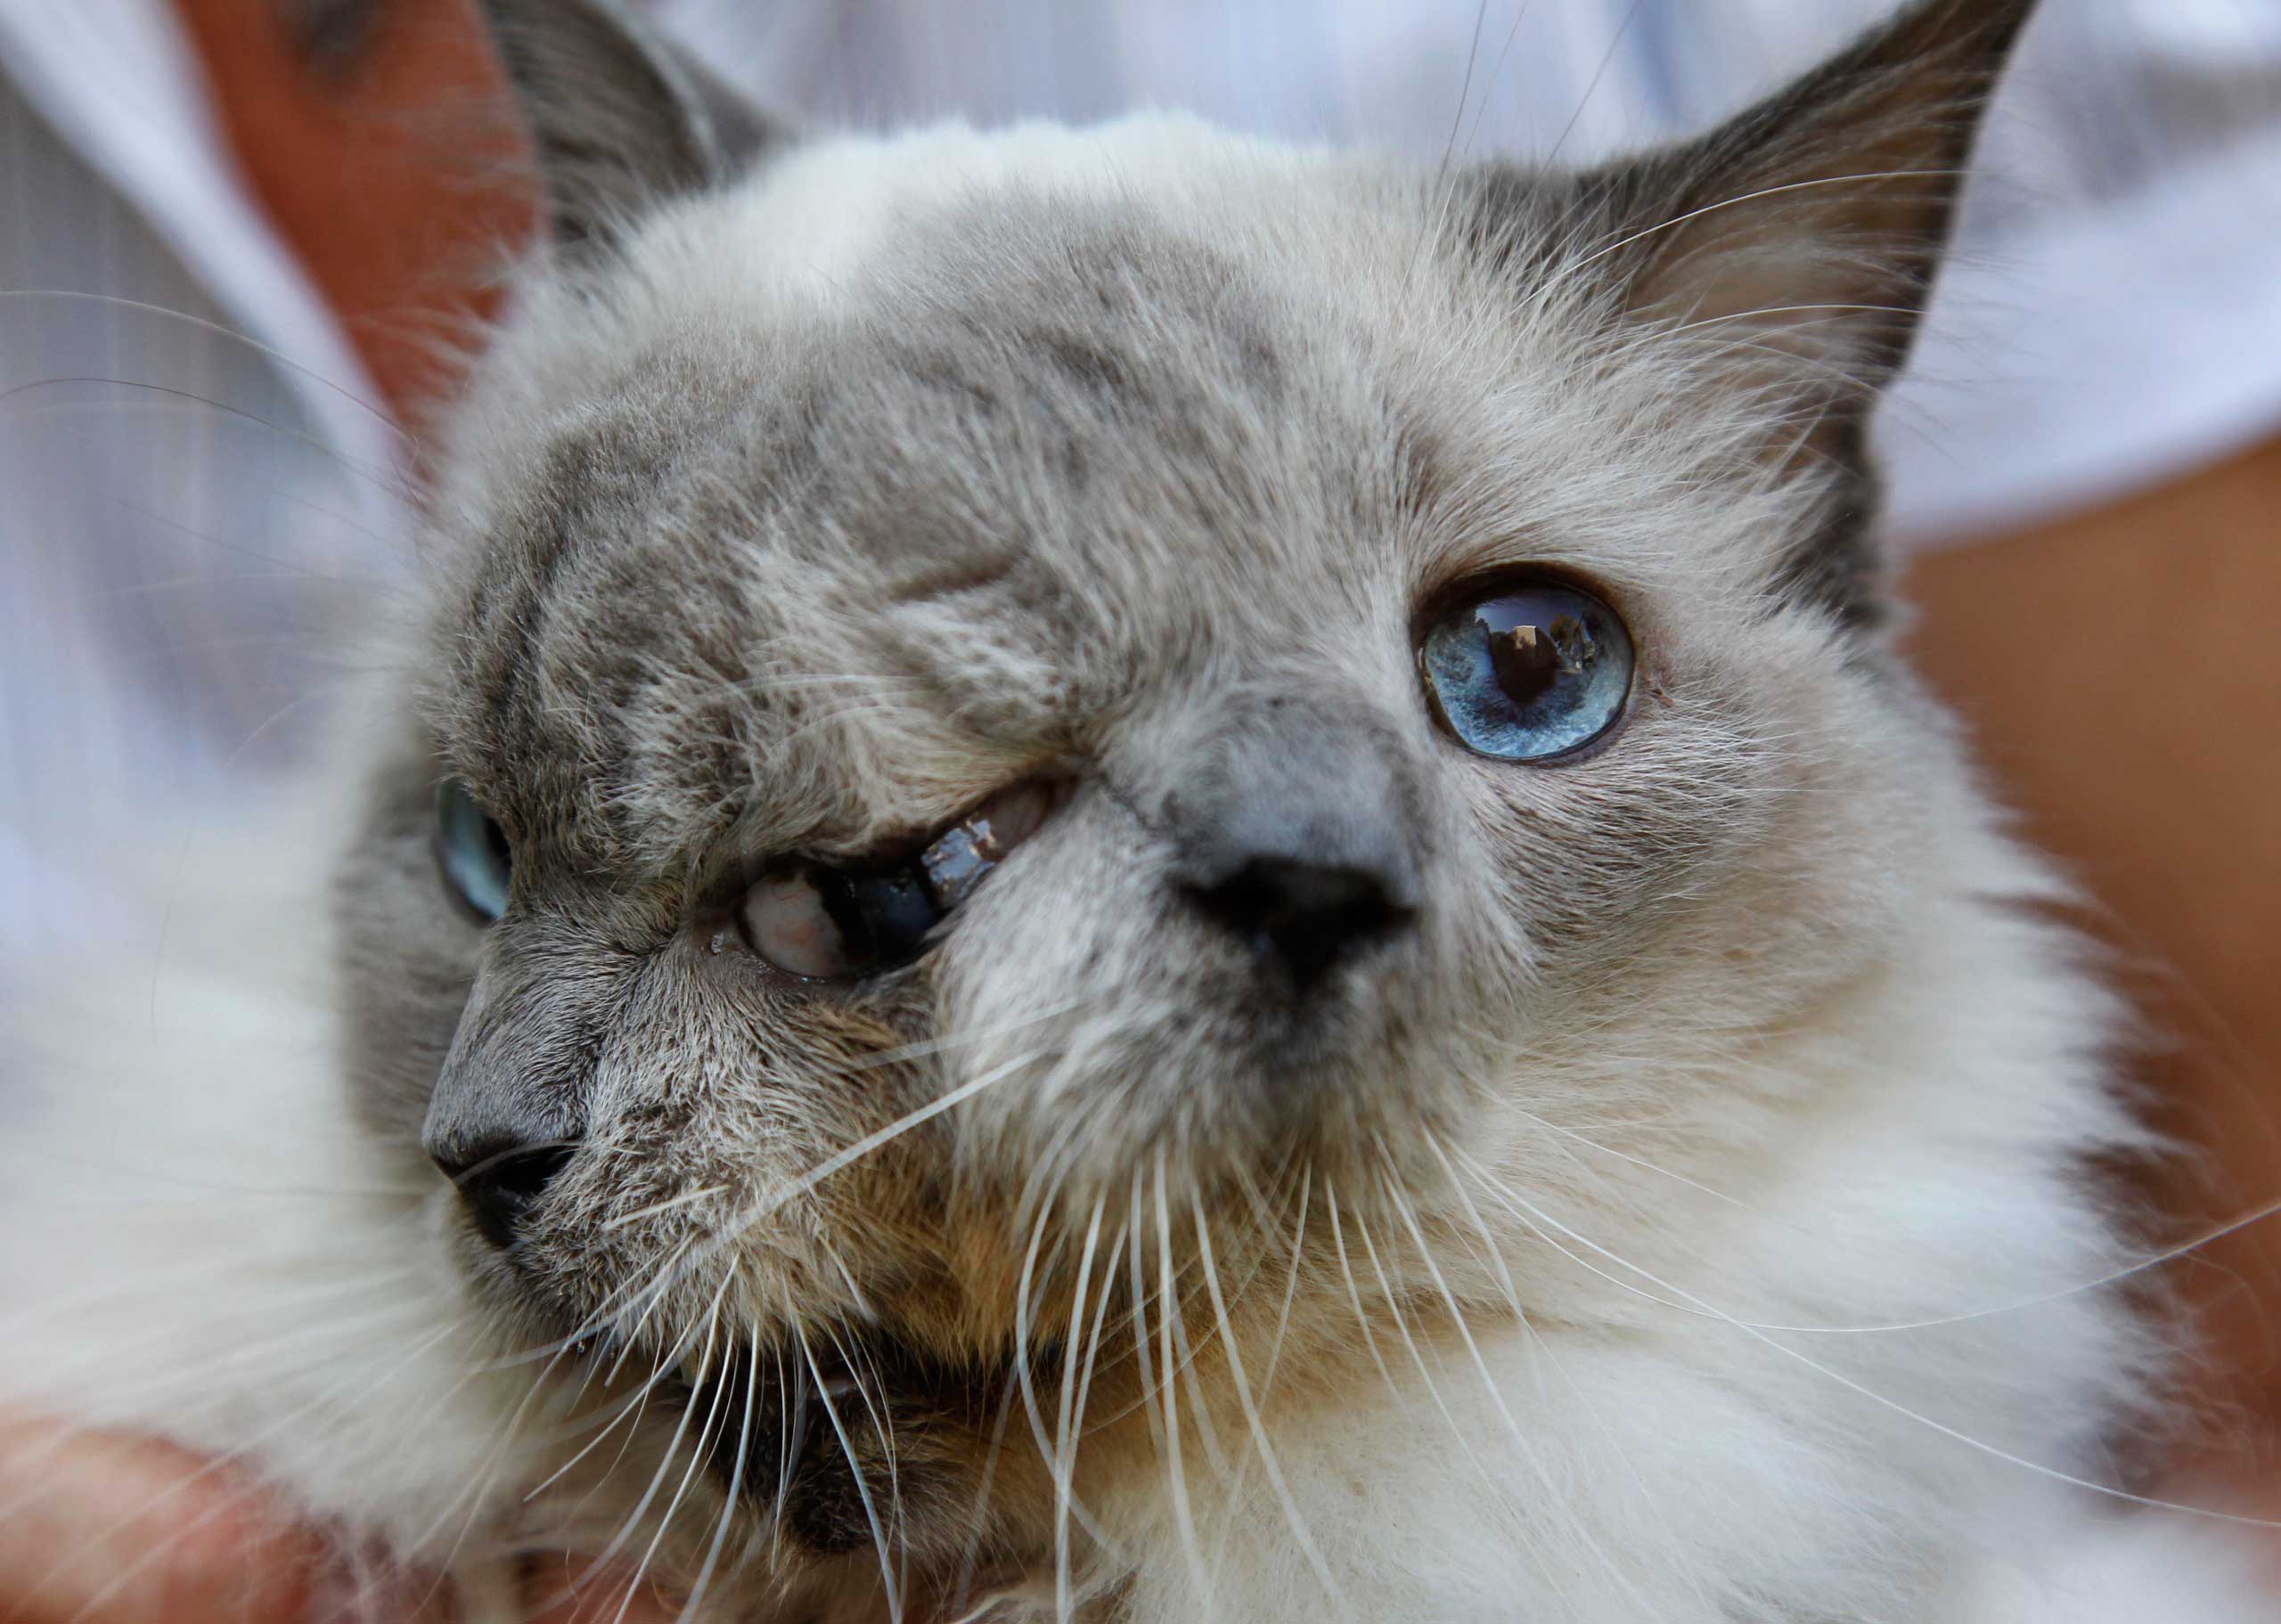 Frank and Louie, a two-faced cat, is held by its owner in Worcester, Mass., Sept. 28, 2011. (Steven Senne—AP)